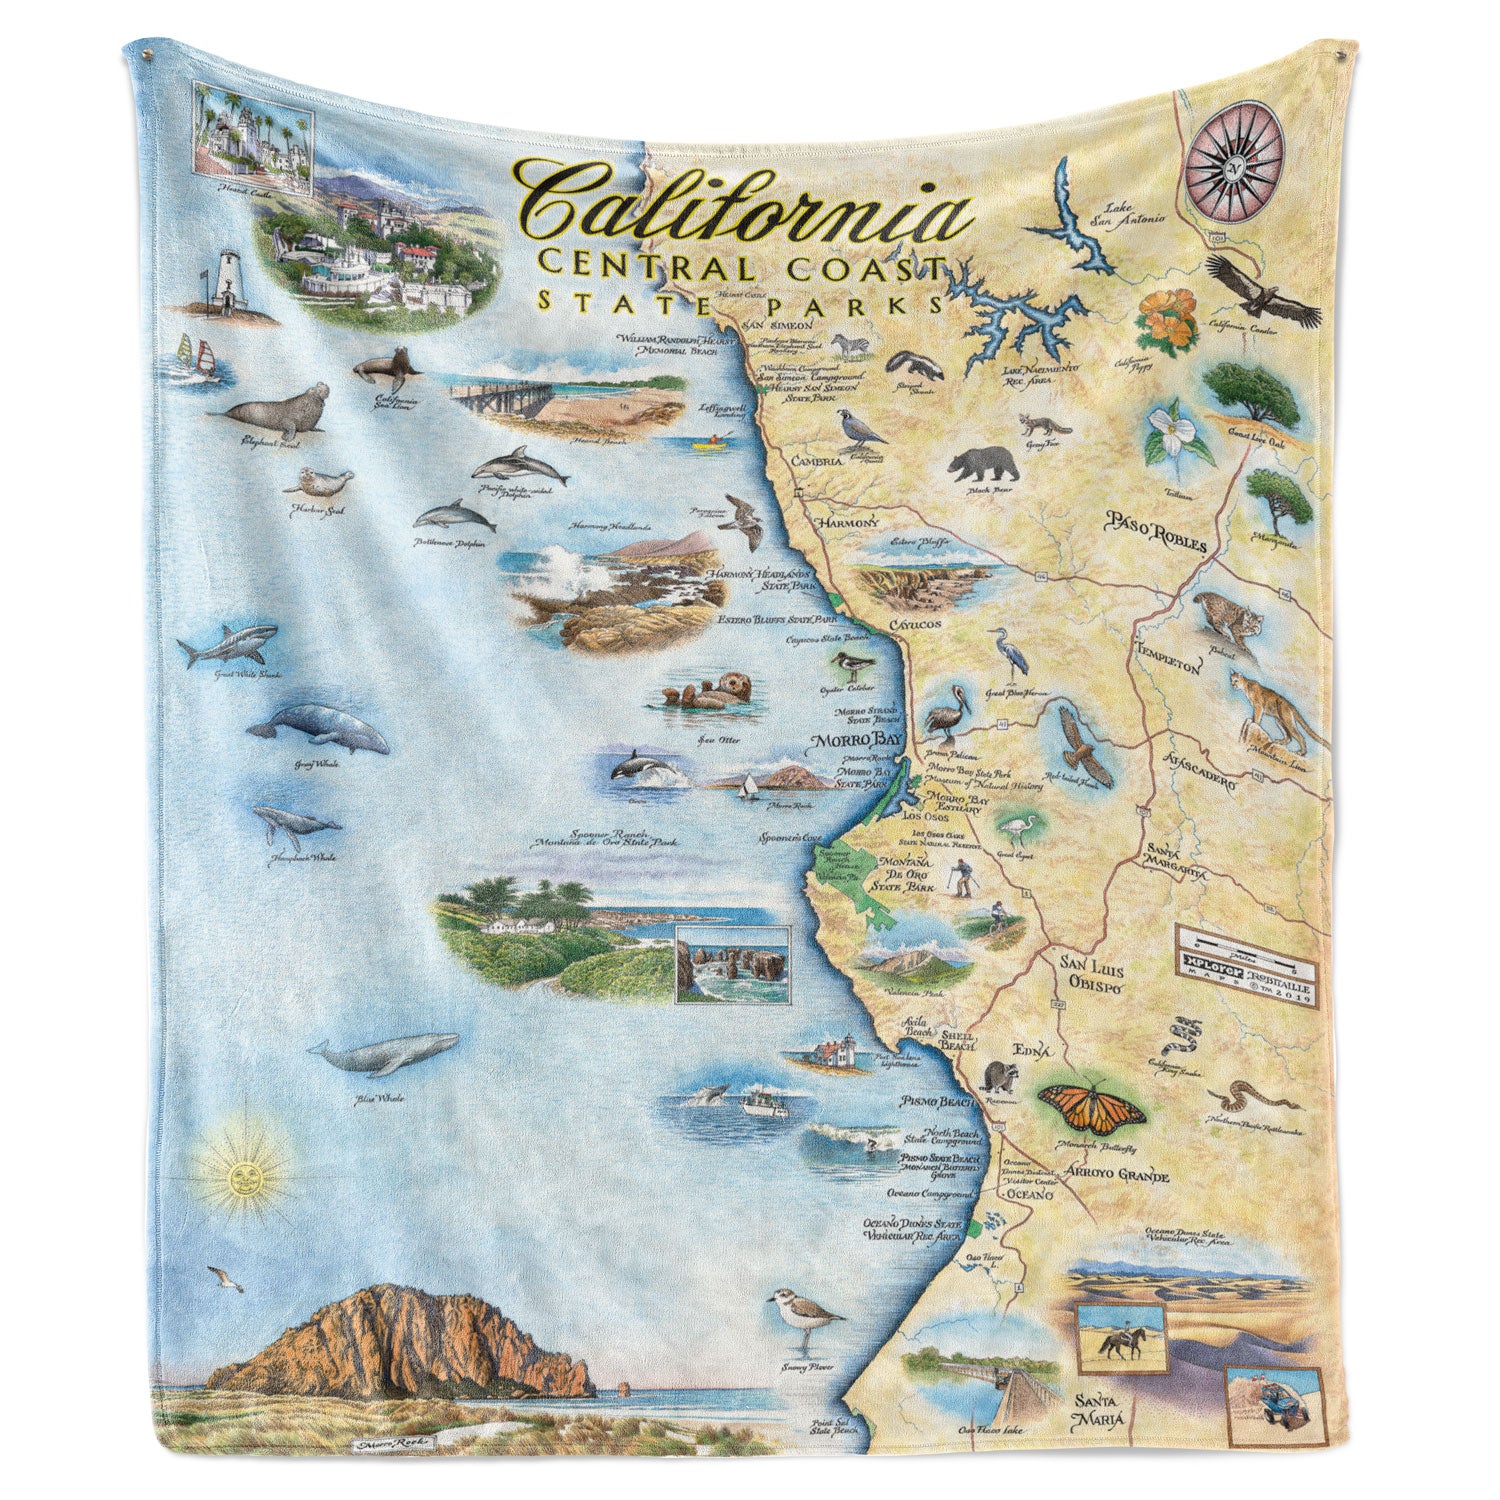 Hanging fleece blanket. Stunning, full color map of California Central Coast State Parks on a warm fleece blanket. Measures 58